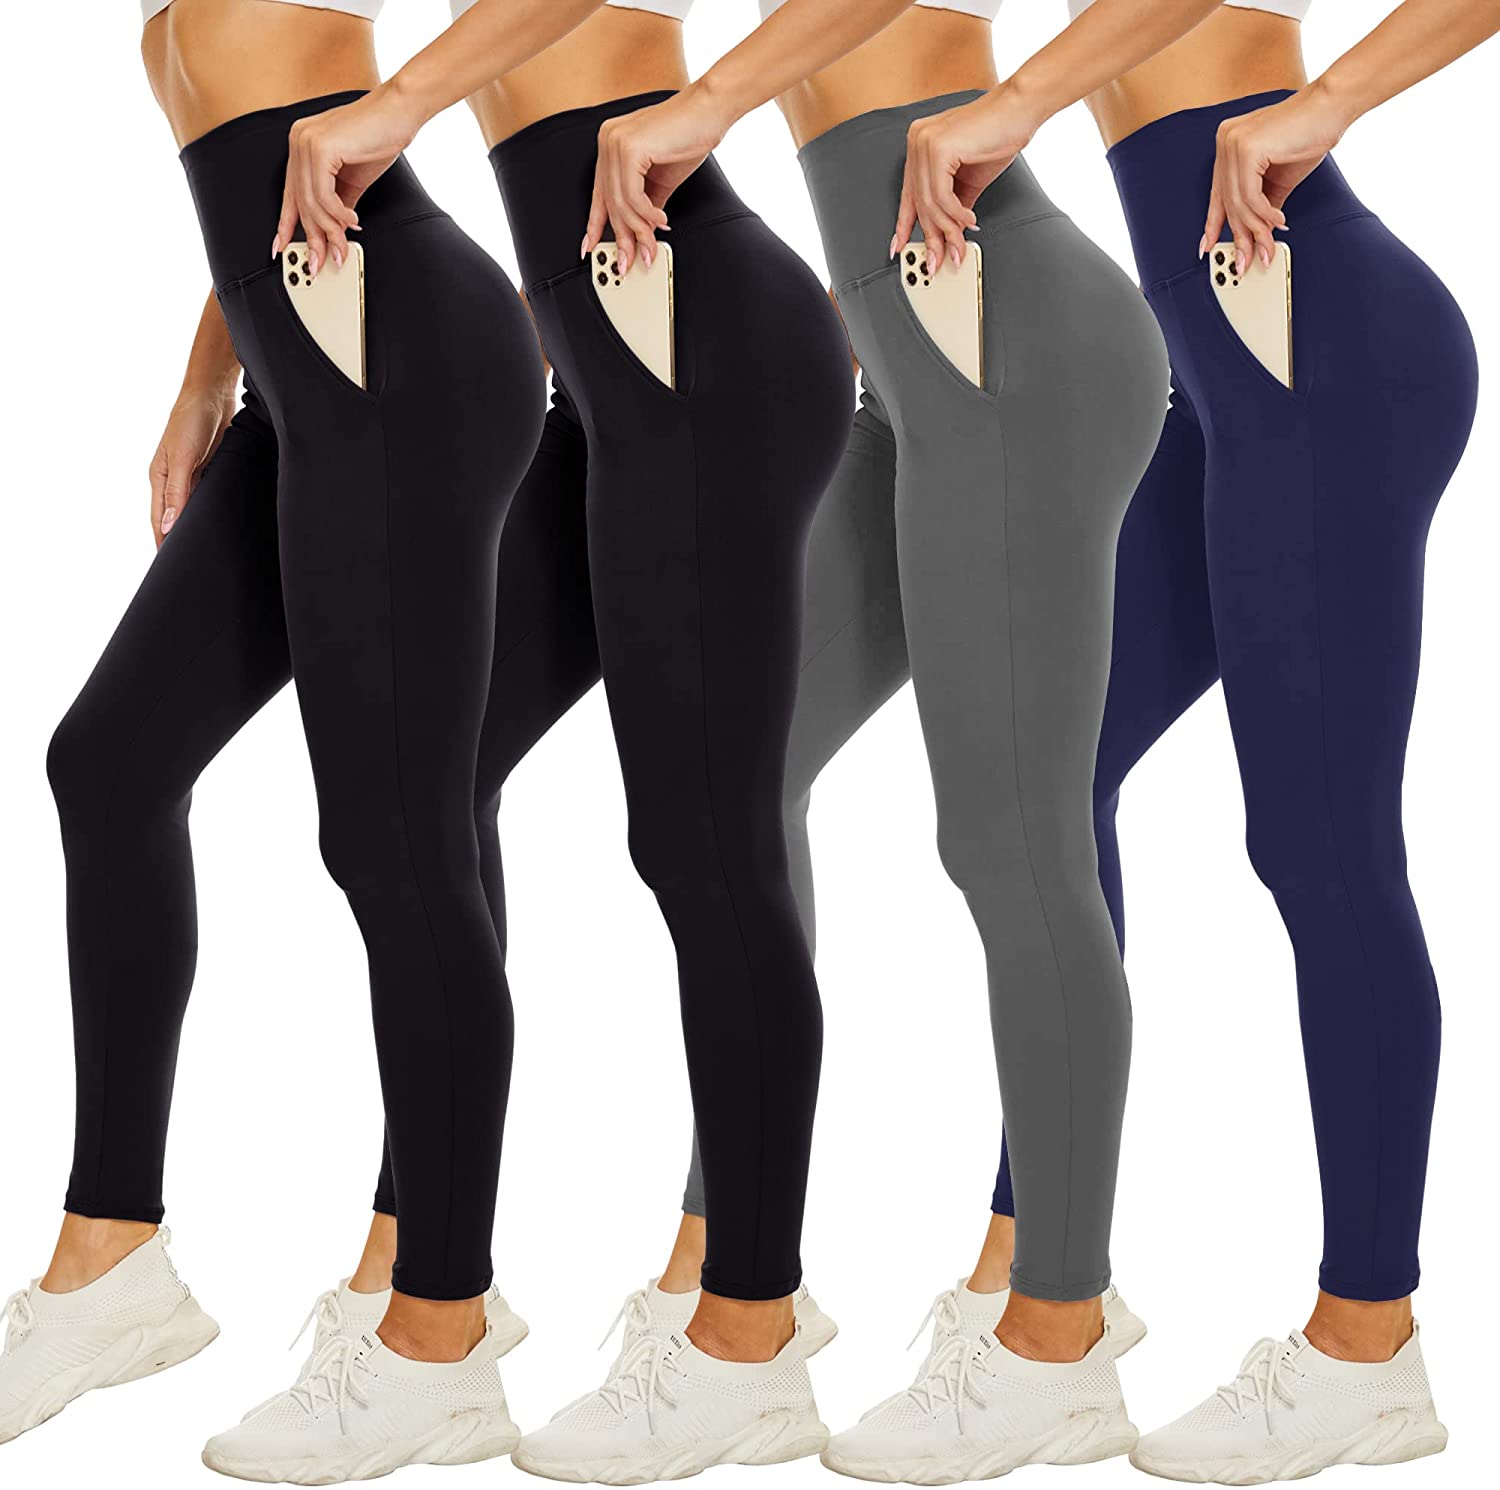 CAMPSNAIL 4 Pack High Waisted Leggings for Women- Soft Tummy Control  Slimming Yoga Pants for Workout Running Reg & Plus Size (Color: 4 Packs,  Black/Dim Grey/White/Coffee, Tamaño: XX-Large)